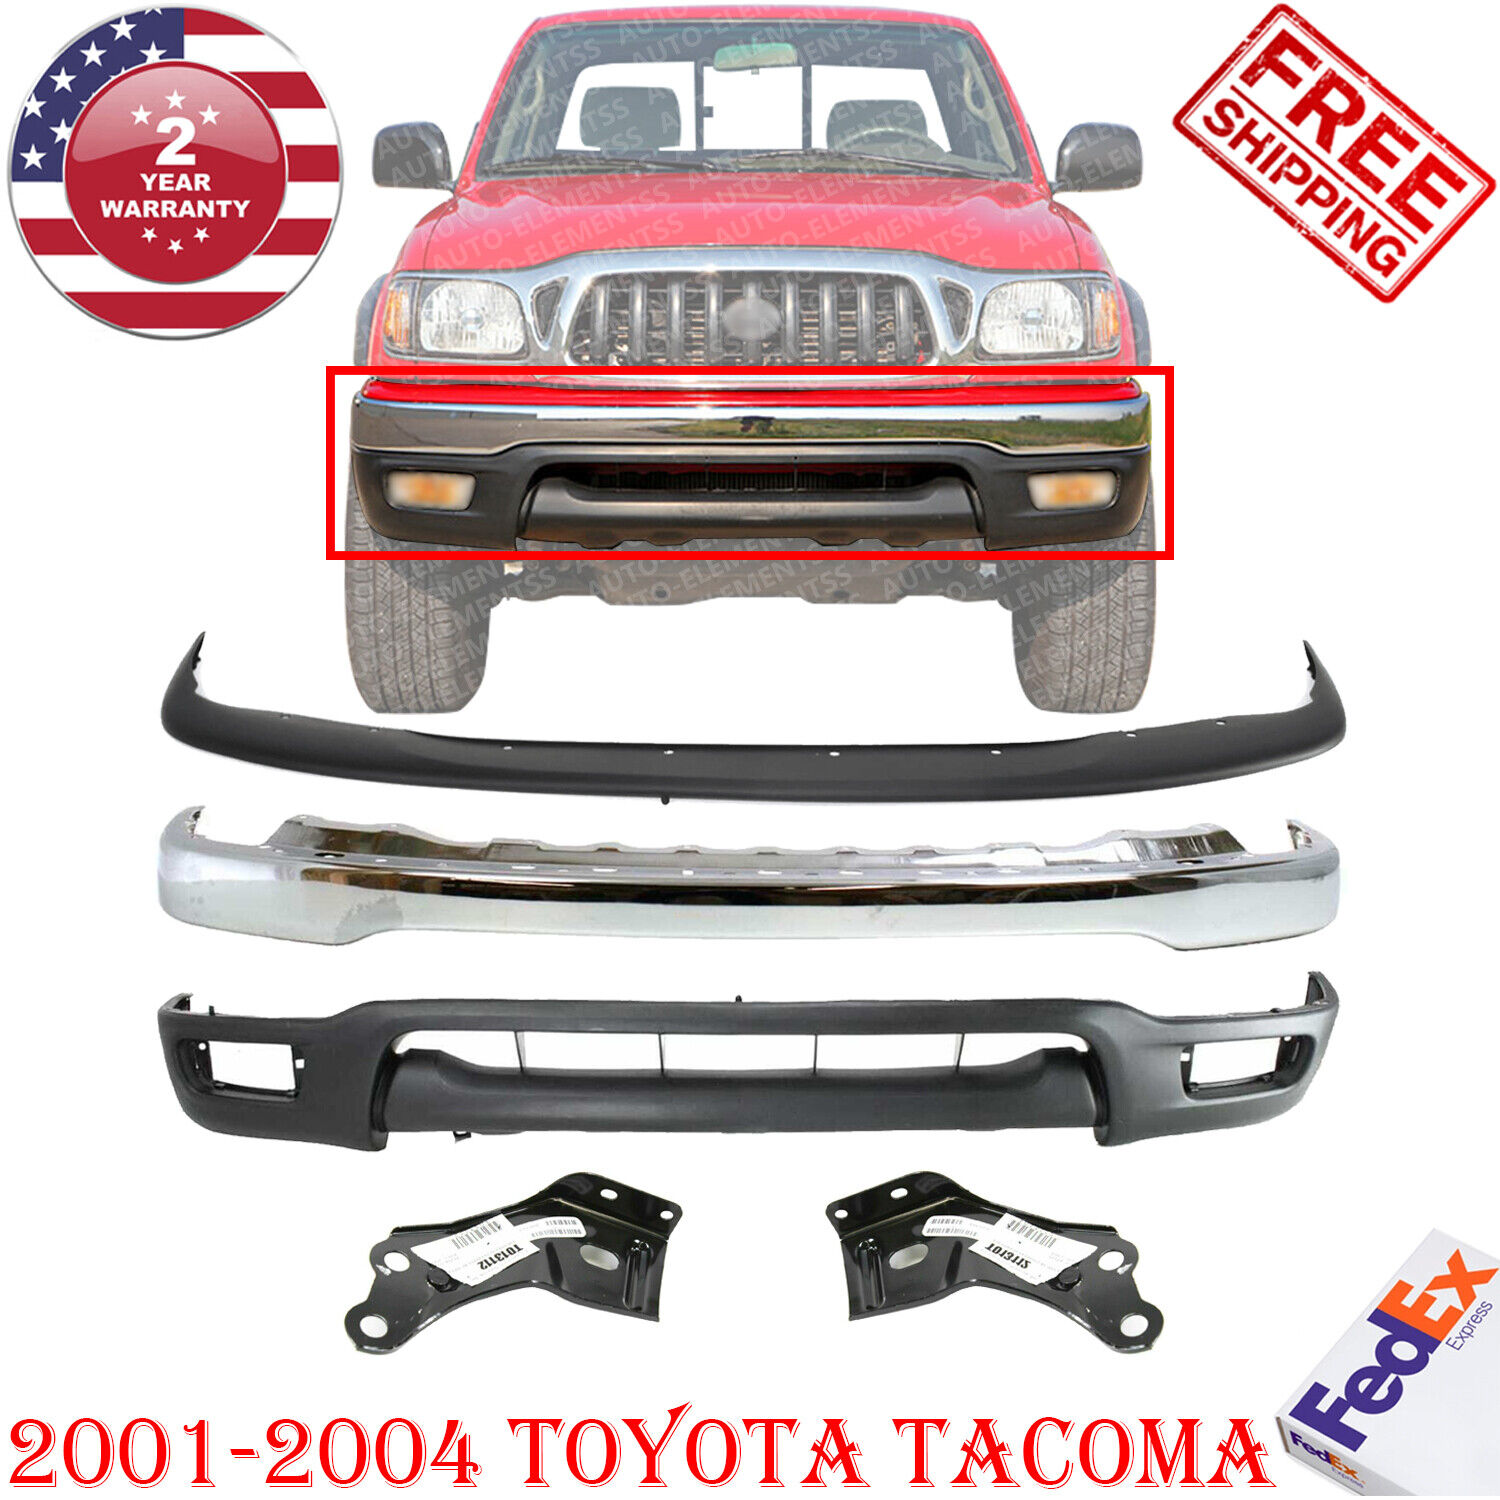 Front Chrome Bumper Replacement Kit  2001-2004 Toyota Tacoma